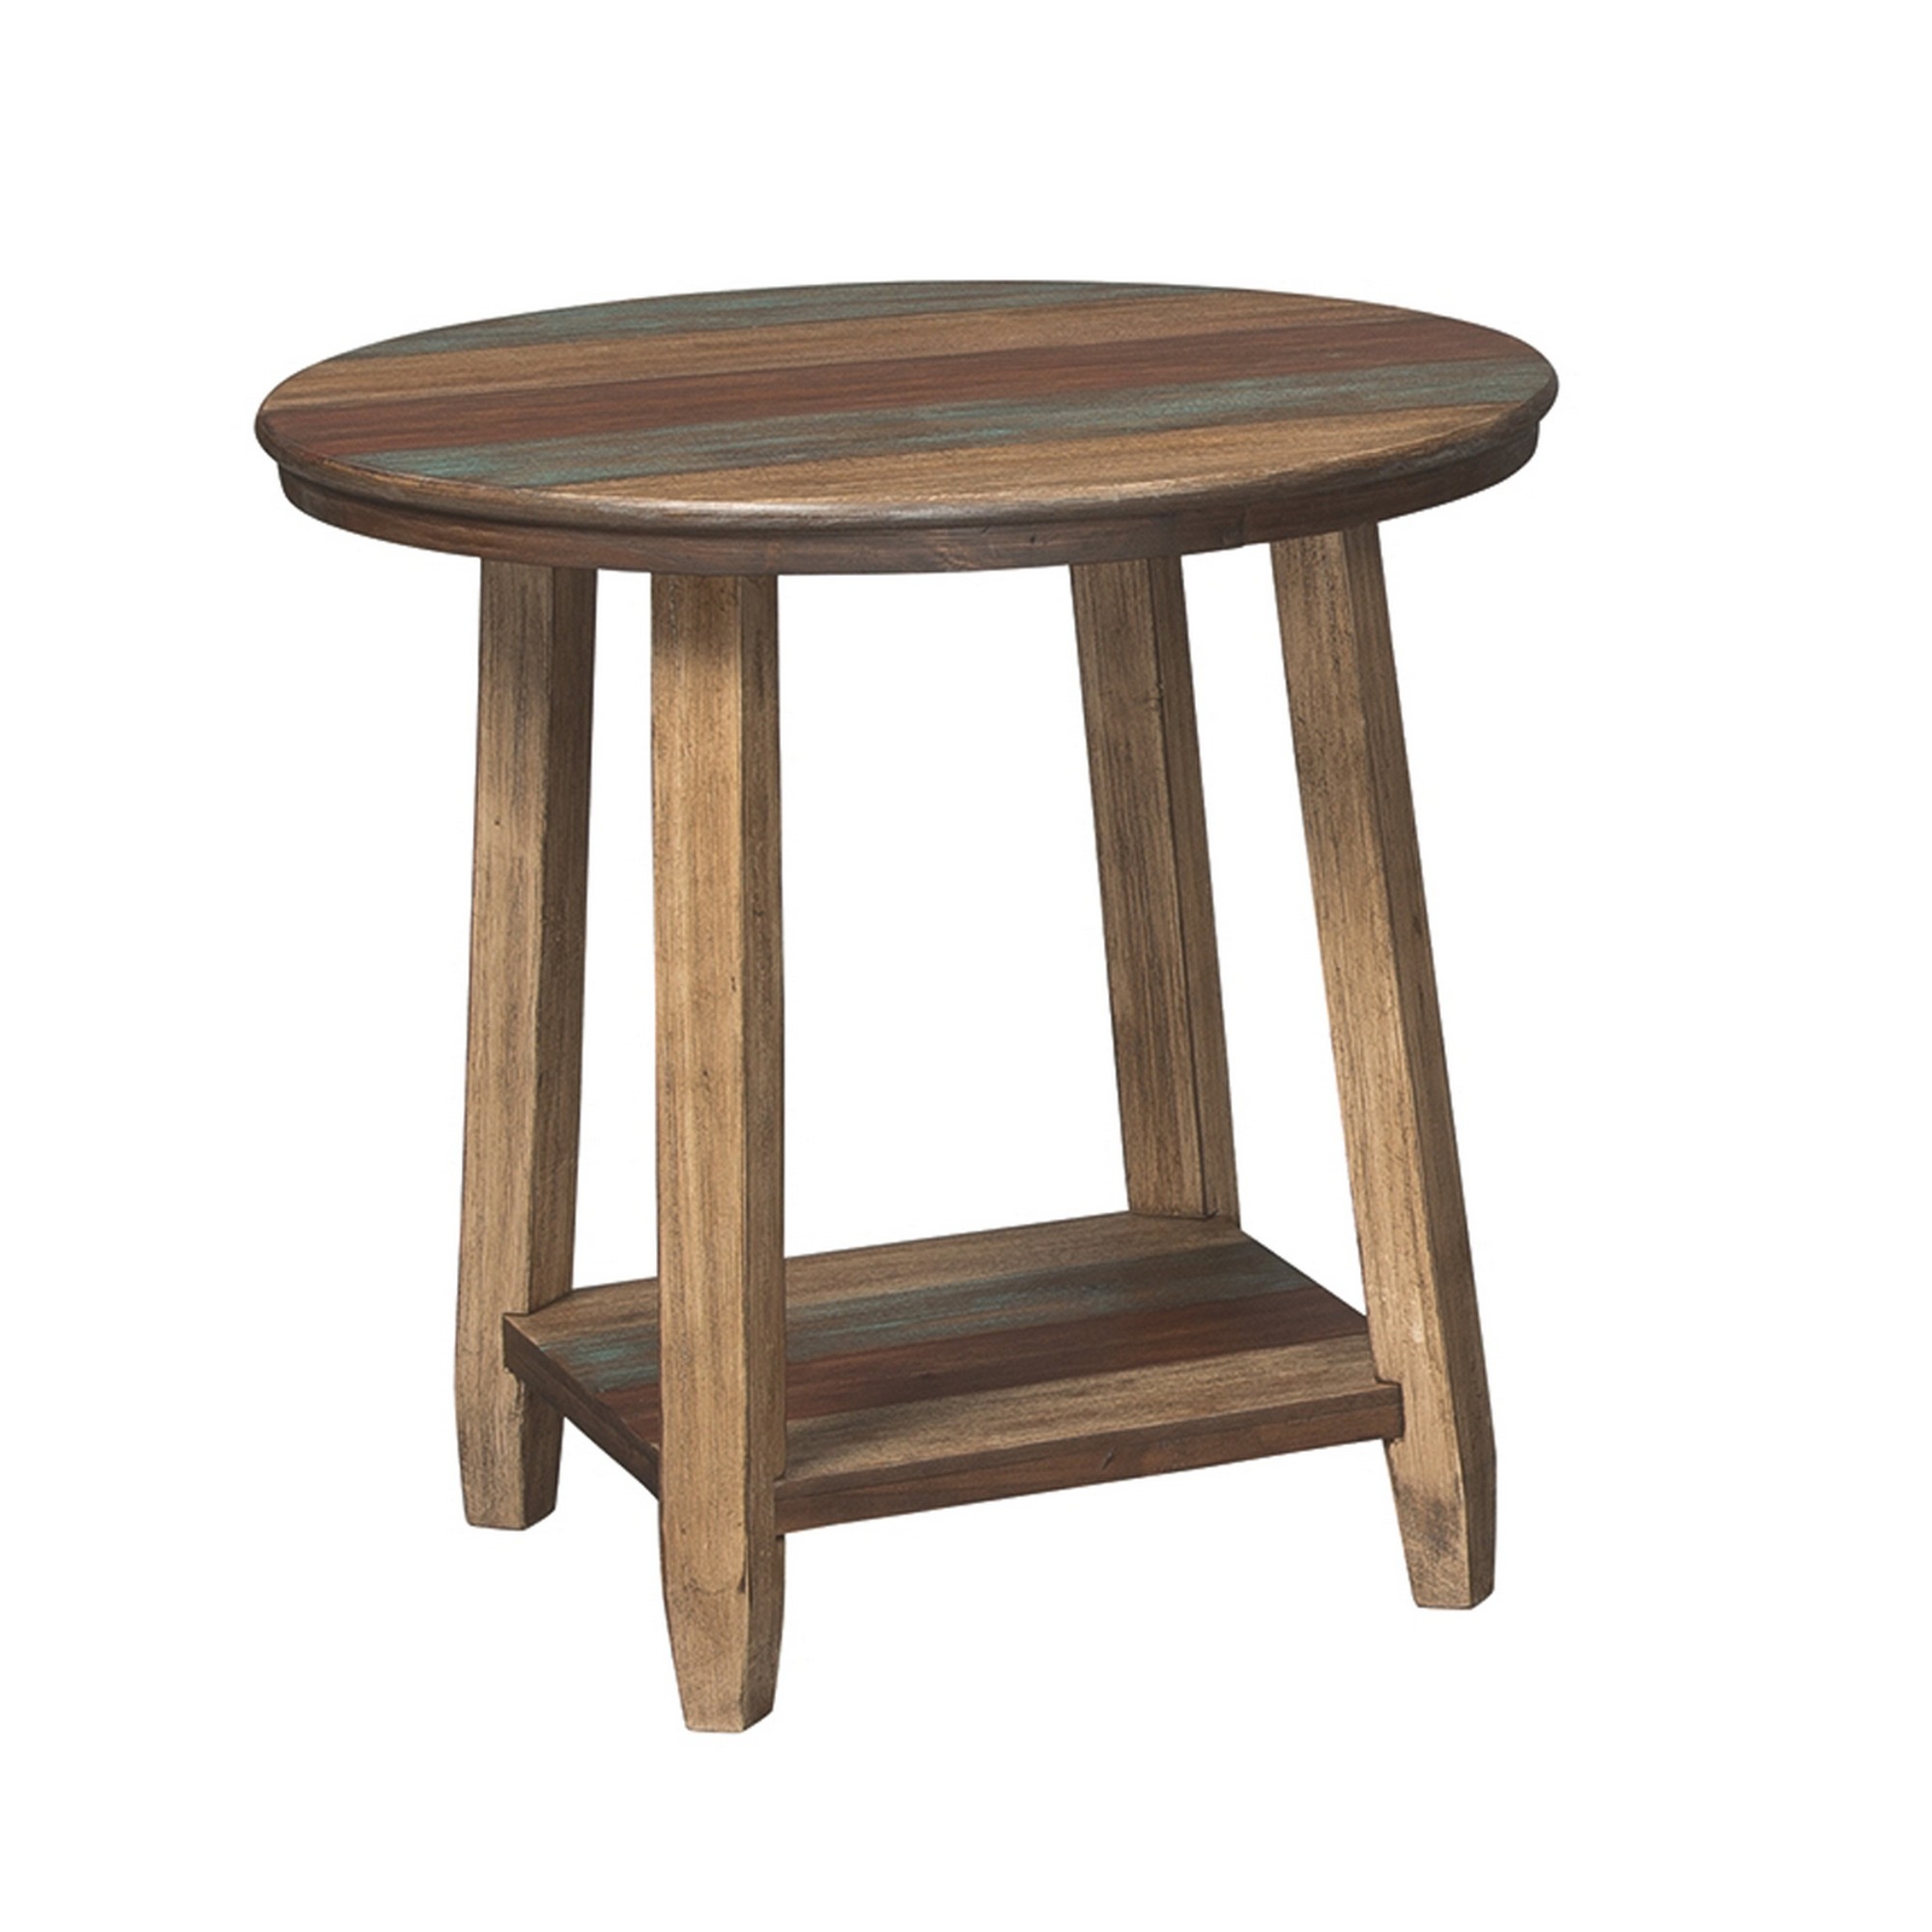 Rustic Plank Style Round Shape Cocktail And 2 End Tables, Set Of 3, Brown- Saltoro Sherpi